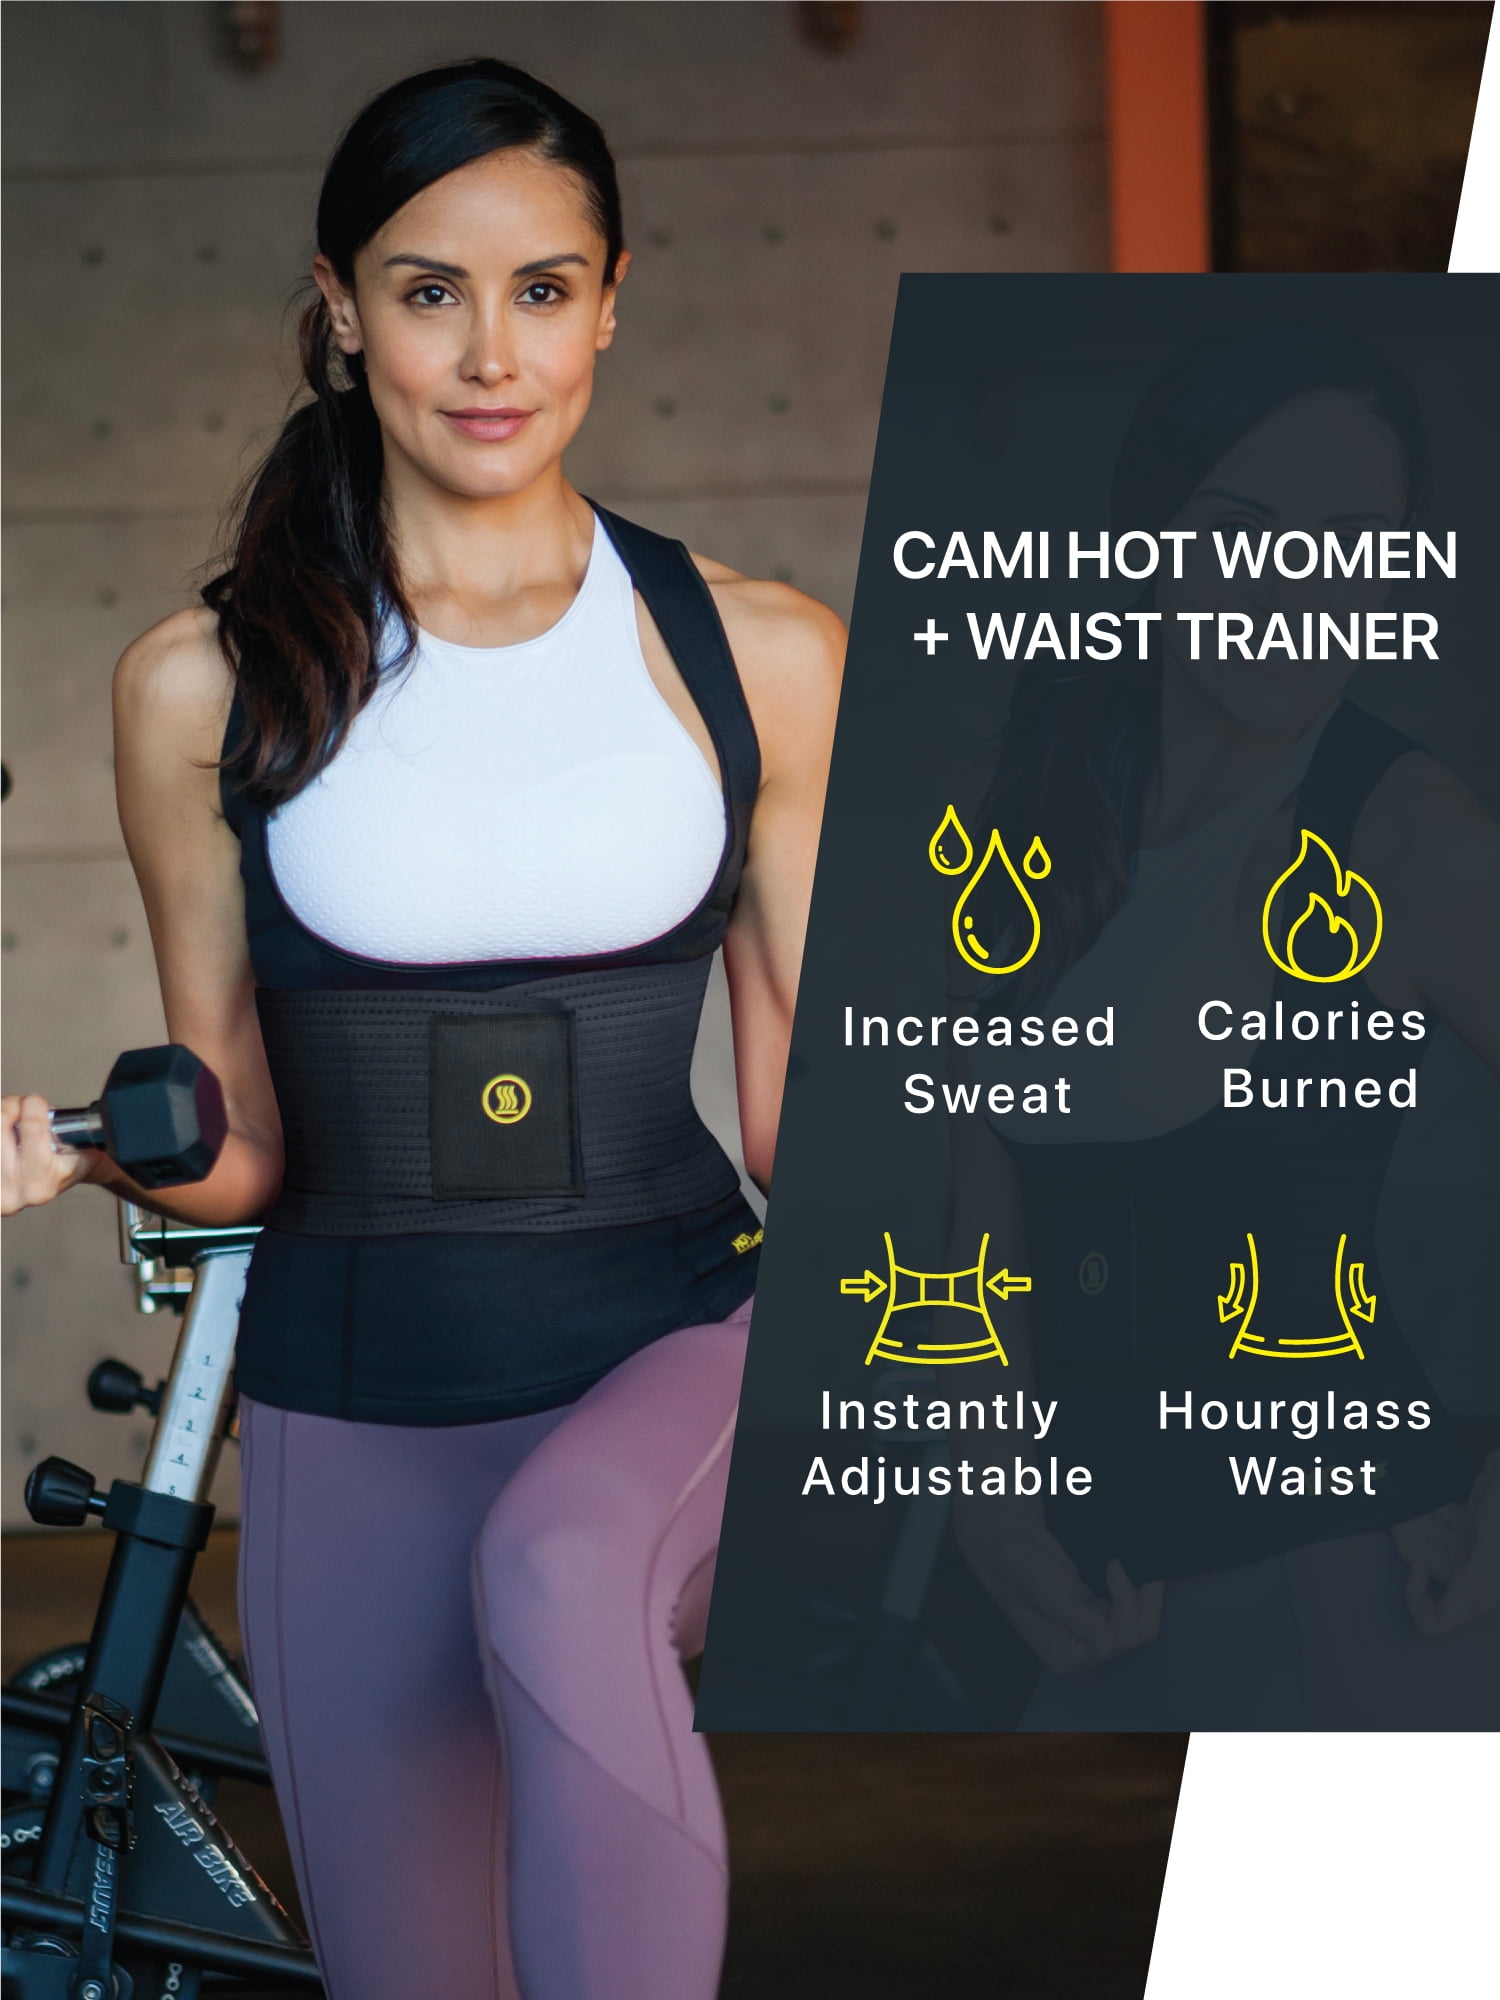 Shape your waist into a stunning hourglass figure with Cami Hot